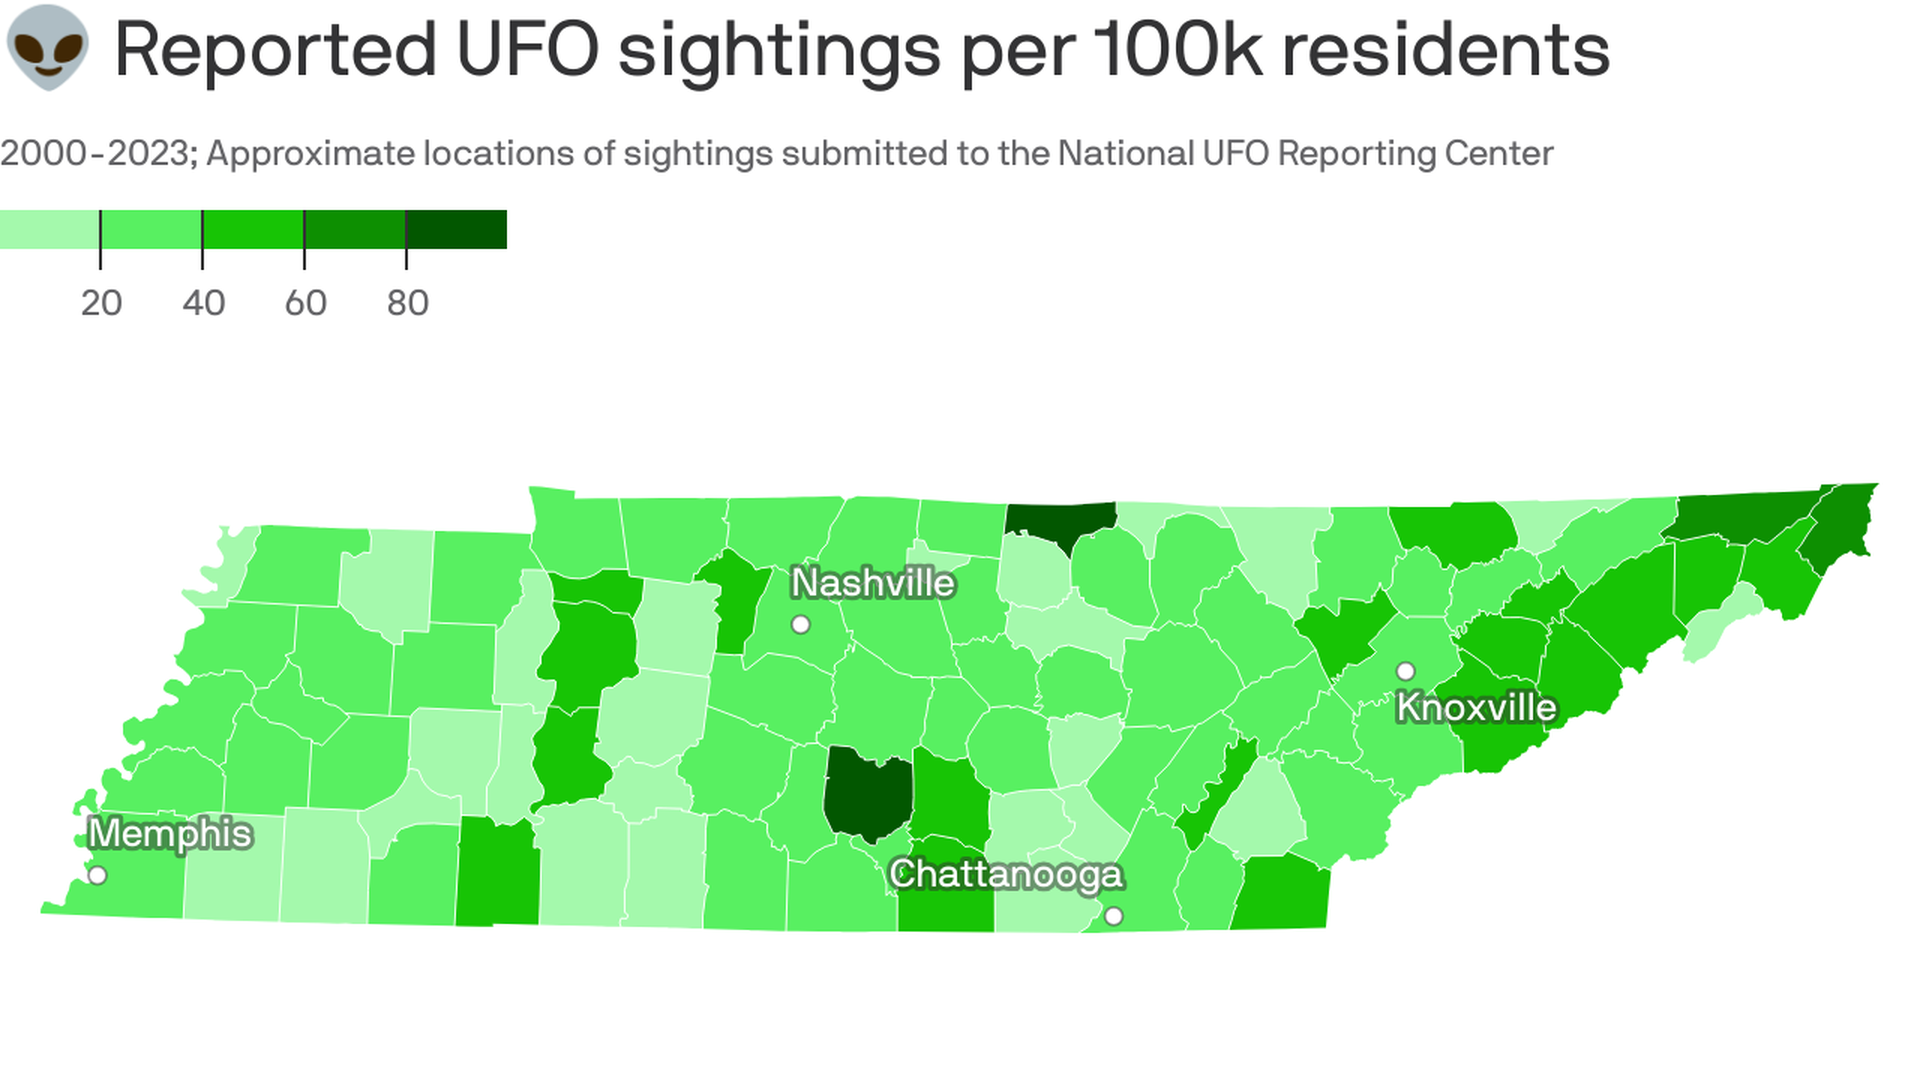 A map showing UFO sightings per capita in Tennessee, with the highest rates in rural Middle Tennessee counties.